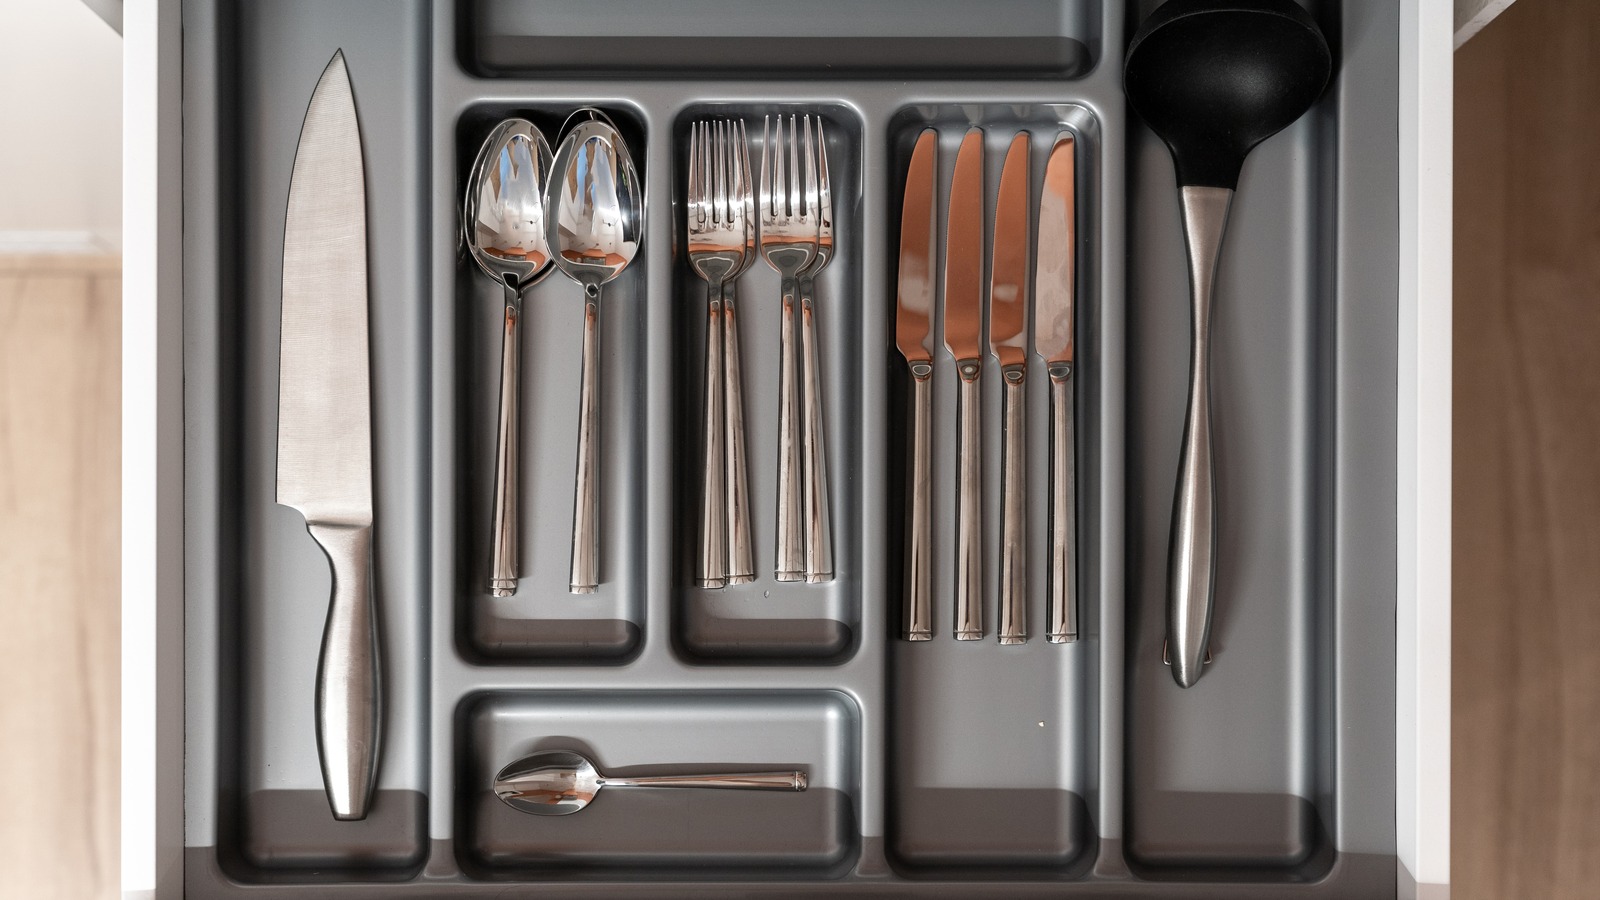 https://www.housedigest.com/img/gallery/what-is-the-difference-between-180-and-1810-for-your-stainless-steel-flatware/l-intro-1696874710.jpg